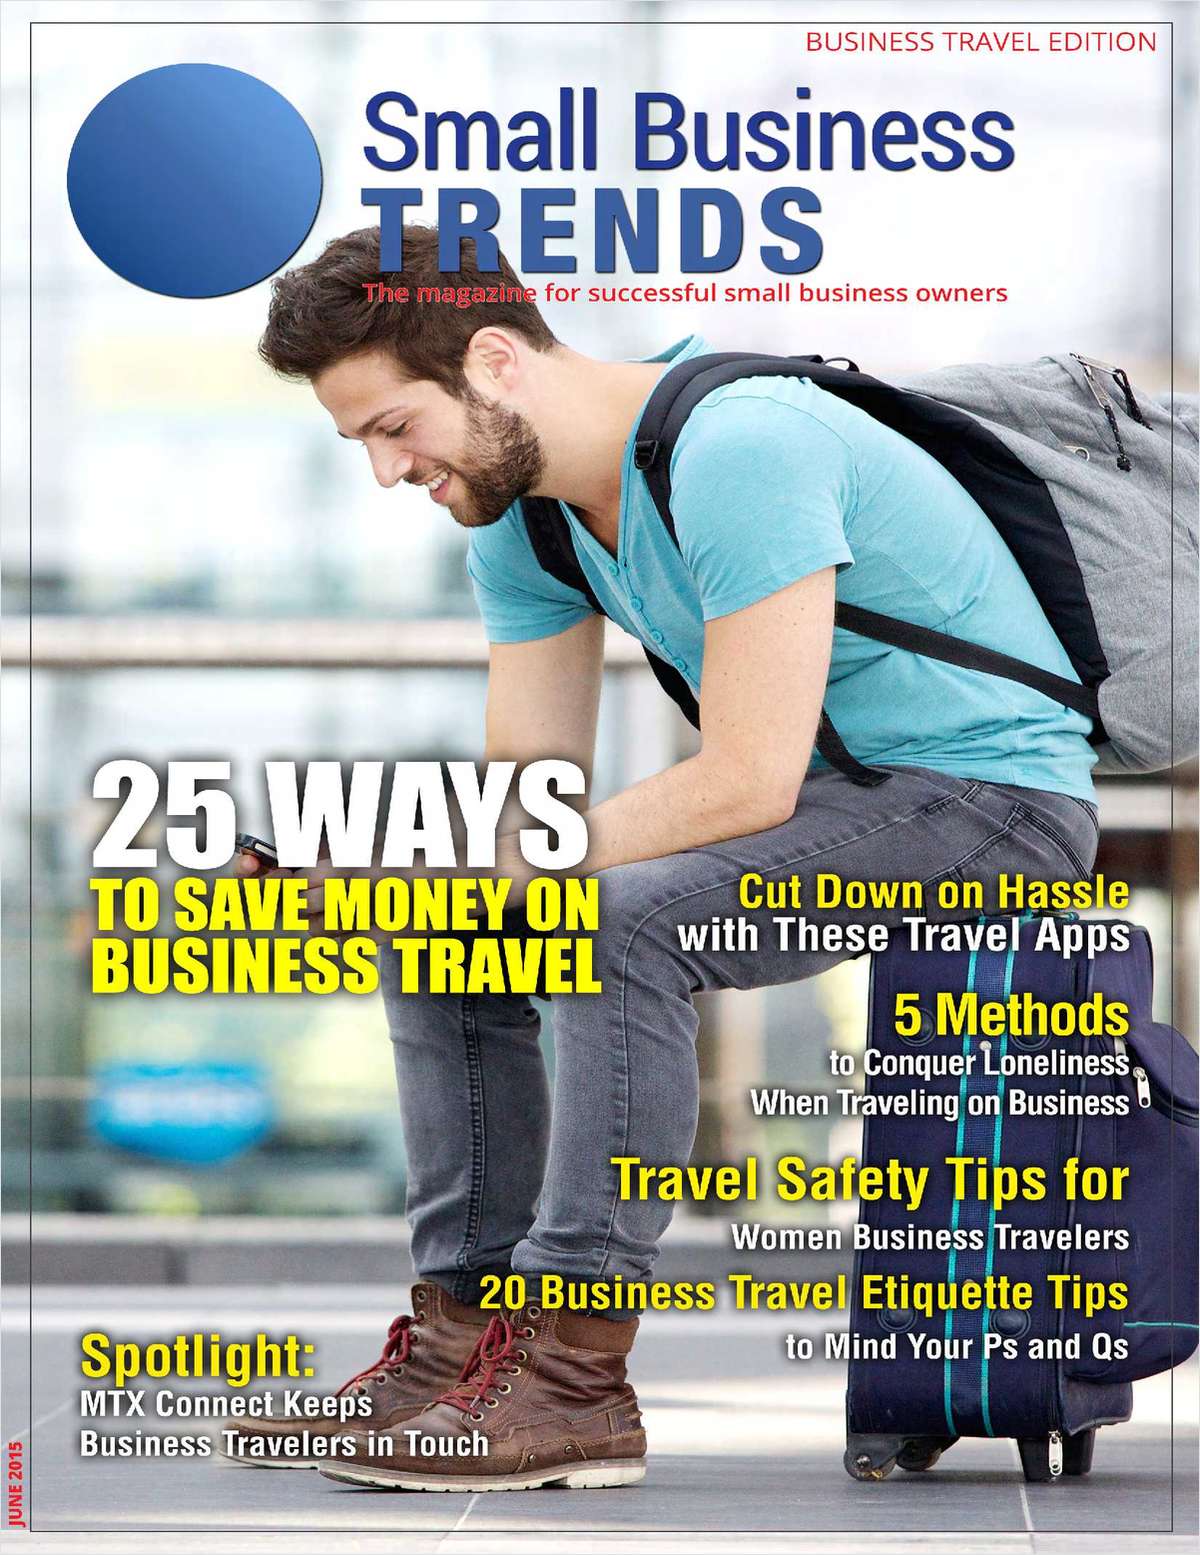 25 Ways to Save Money on Business Travel -- Business Travel Edition